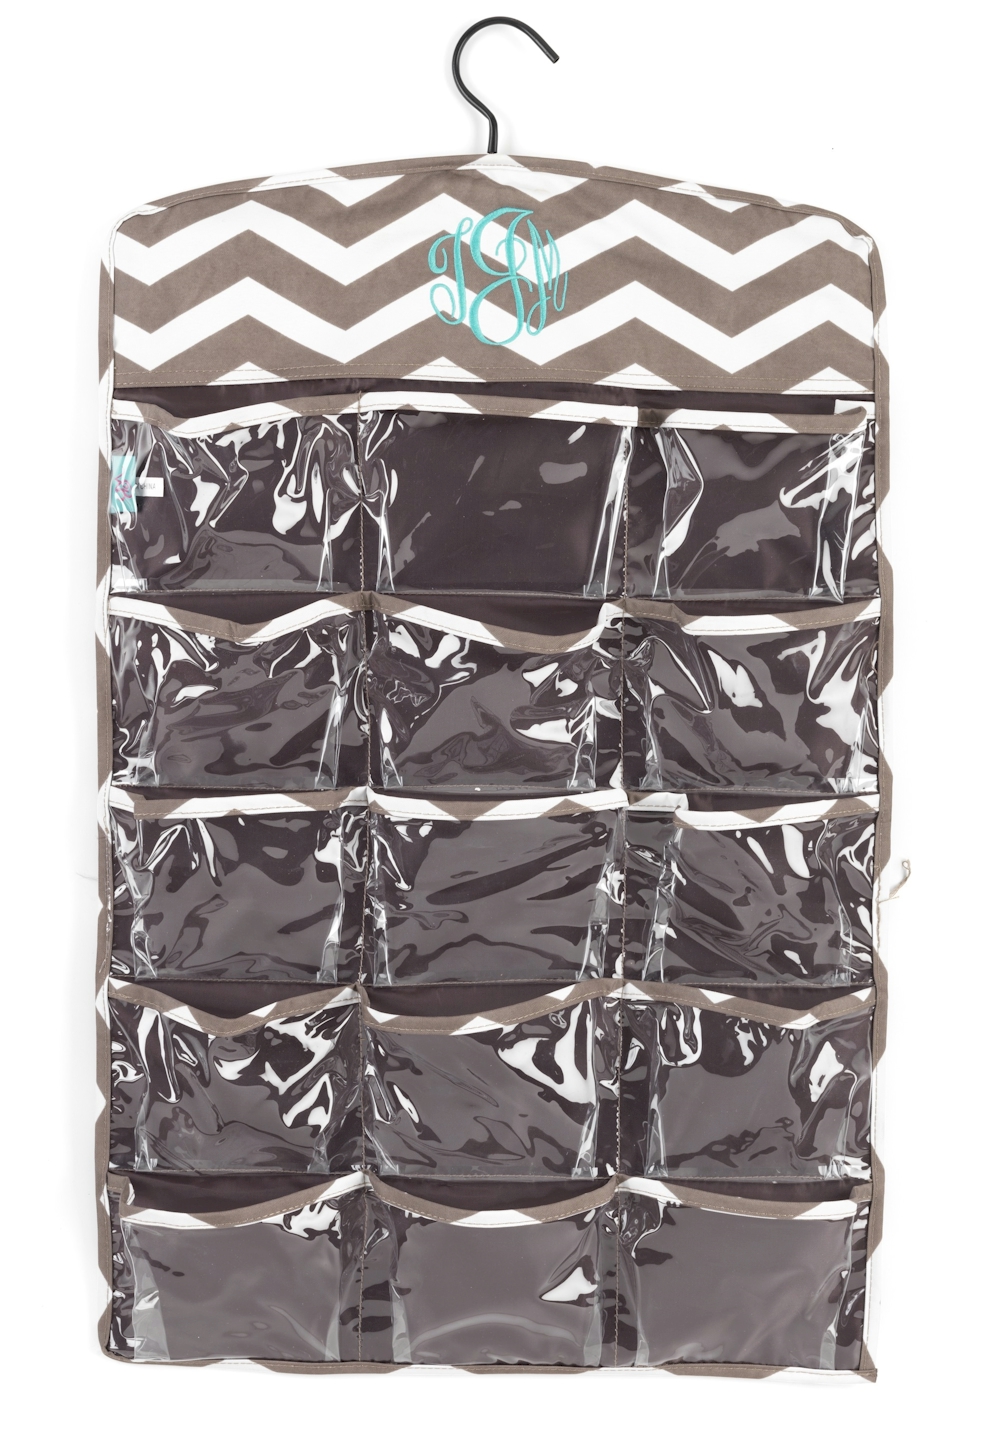 Hanging Organizer Embroidery Blanks - TAUPE CHEVRON